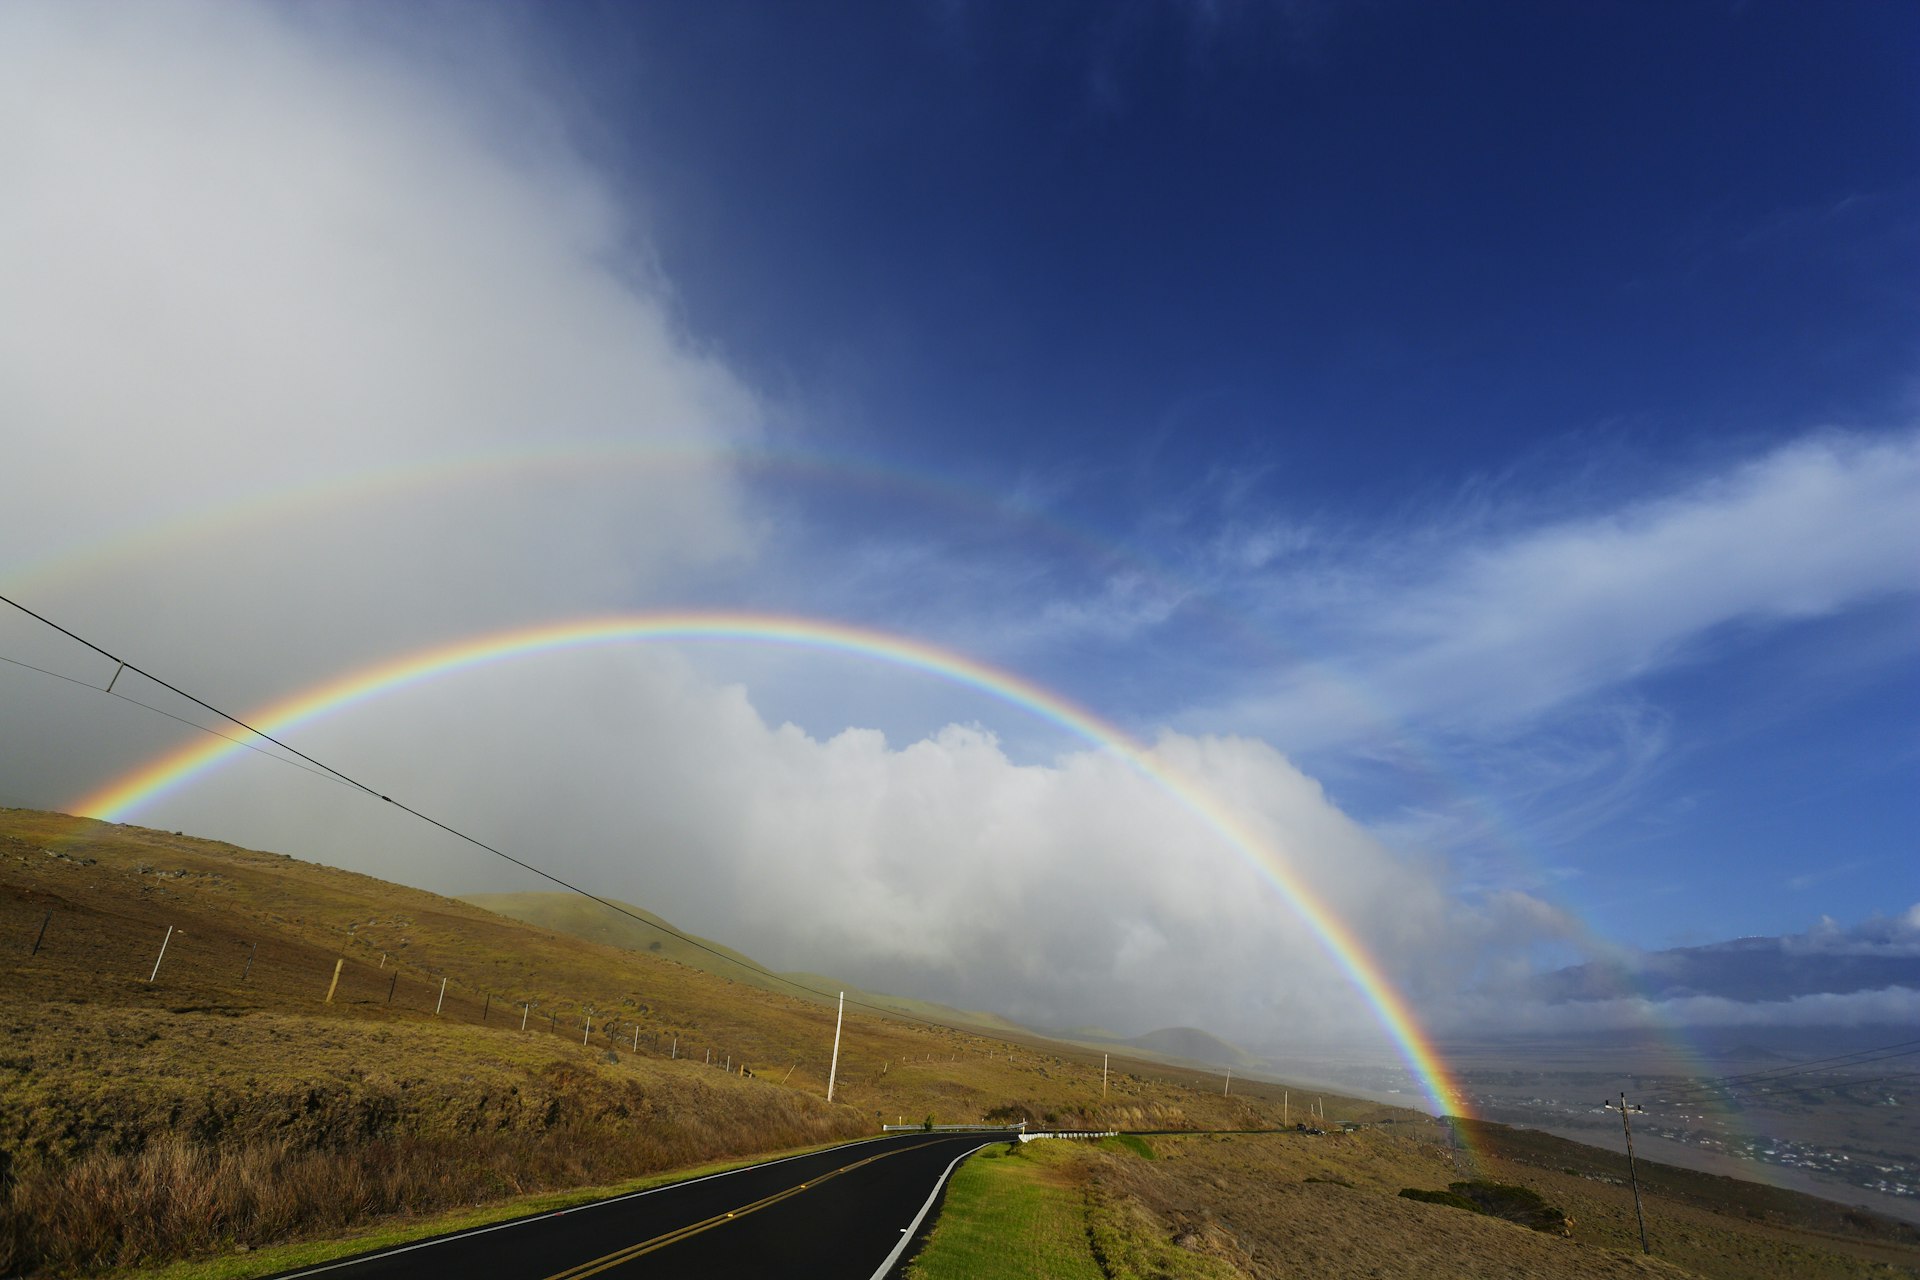 Rainbow appearing over the highway with Mauna Kea can be seen behind the rainbow